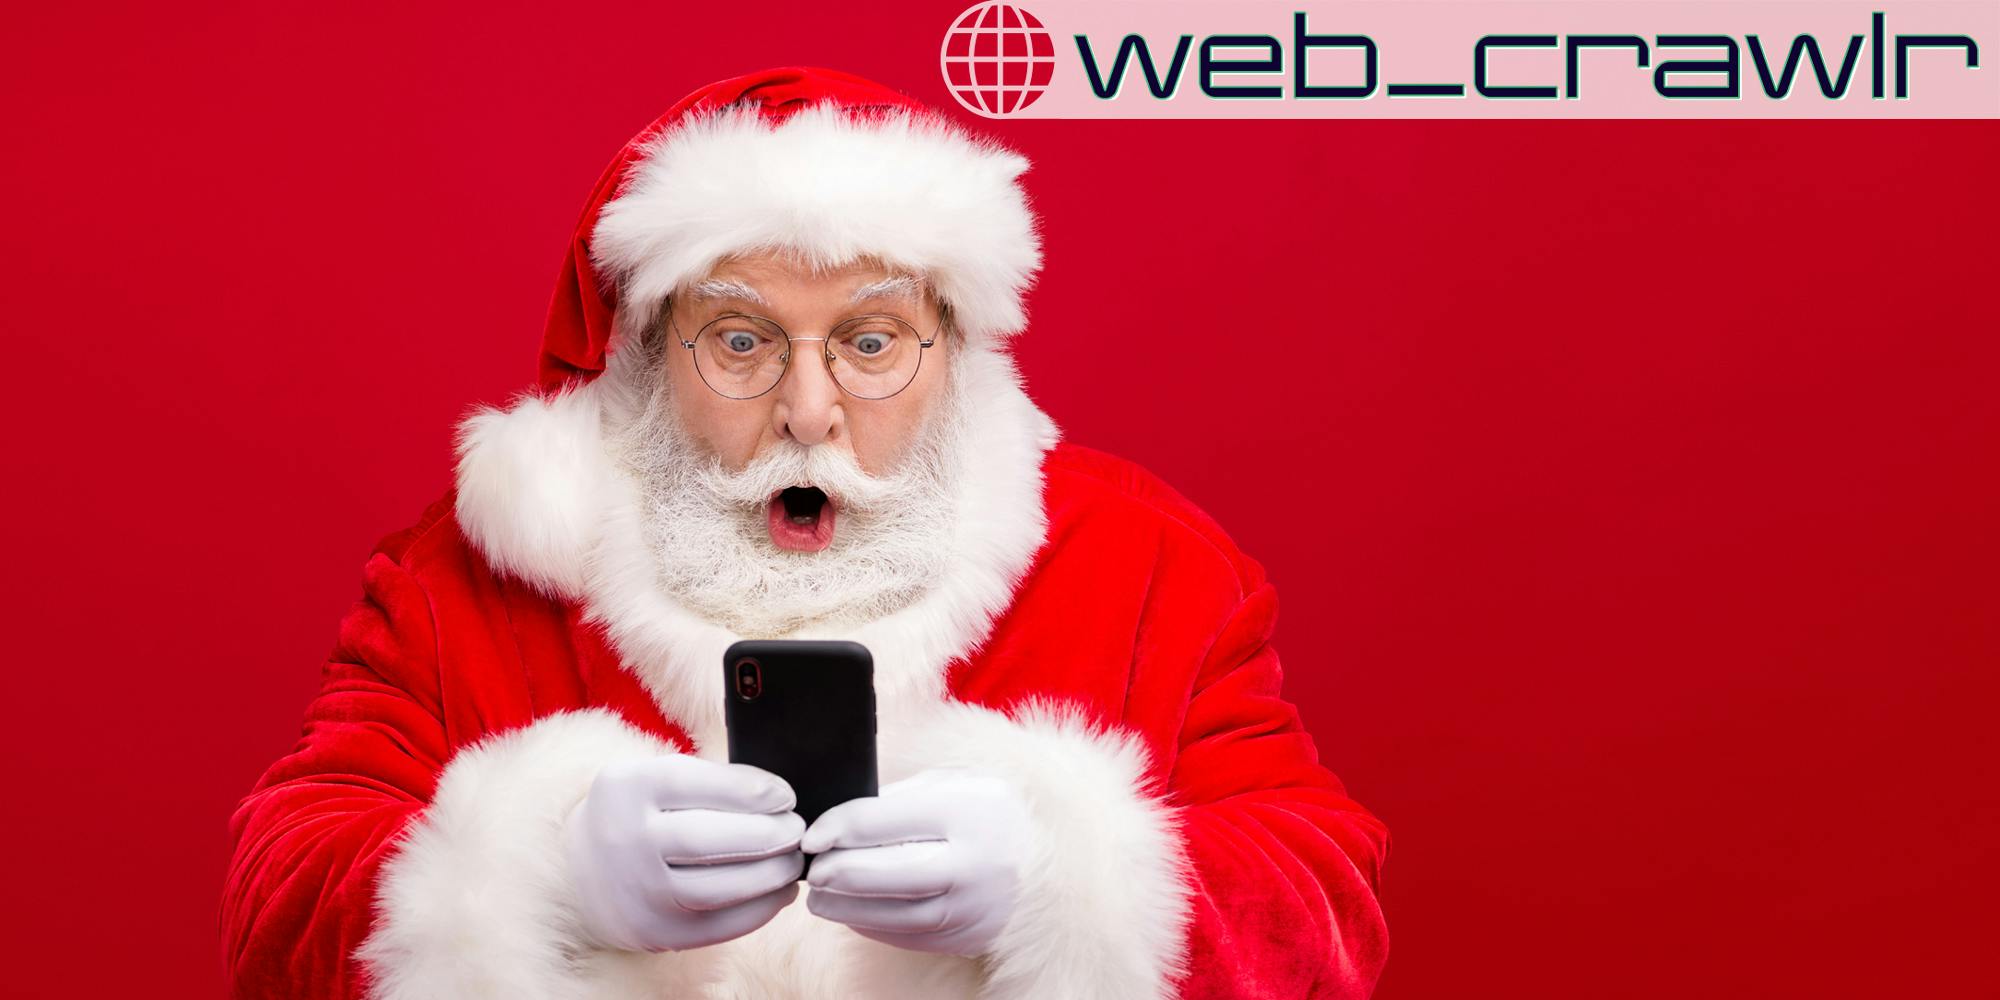 Santa holding a phone and being shocked. The Daily Dot newsletter web_crawlr logo is in the top right corner.